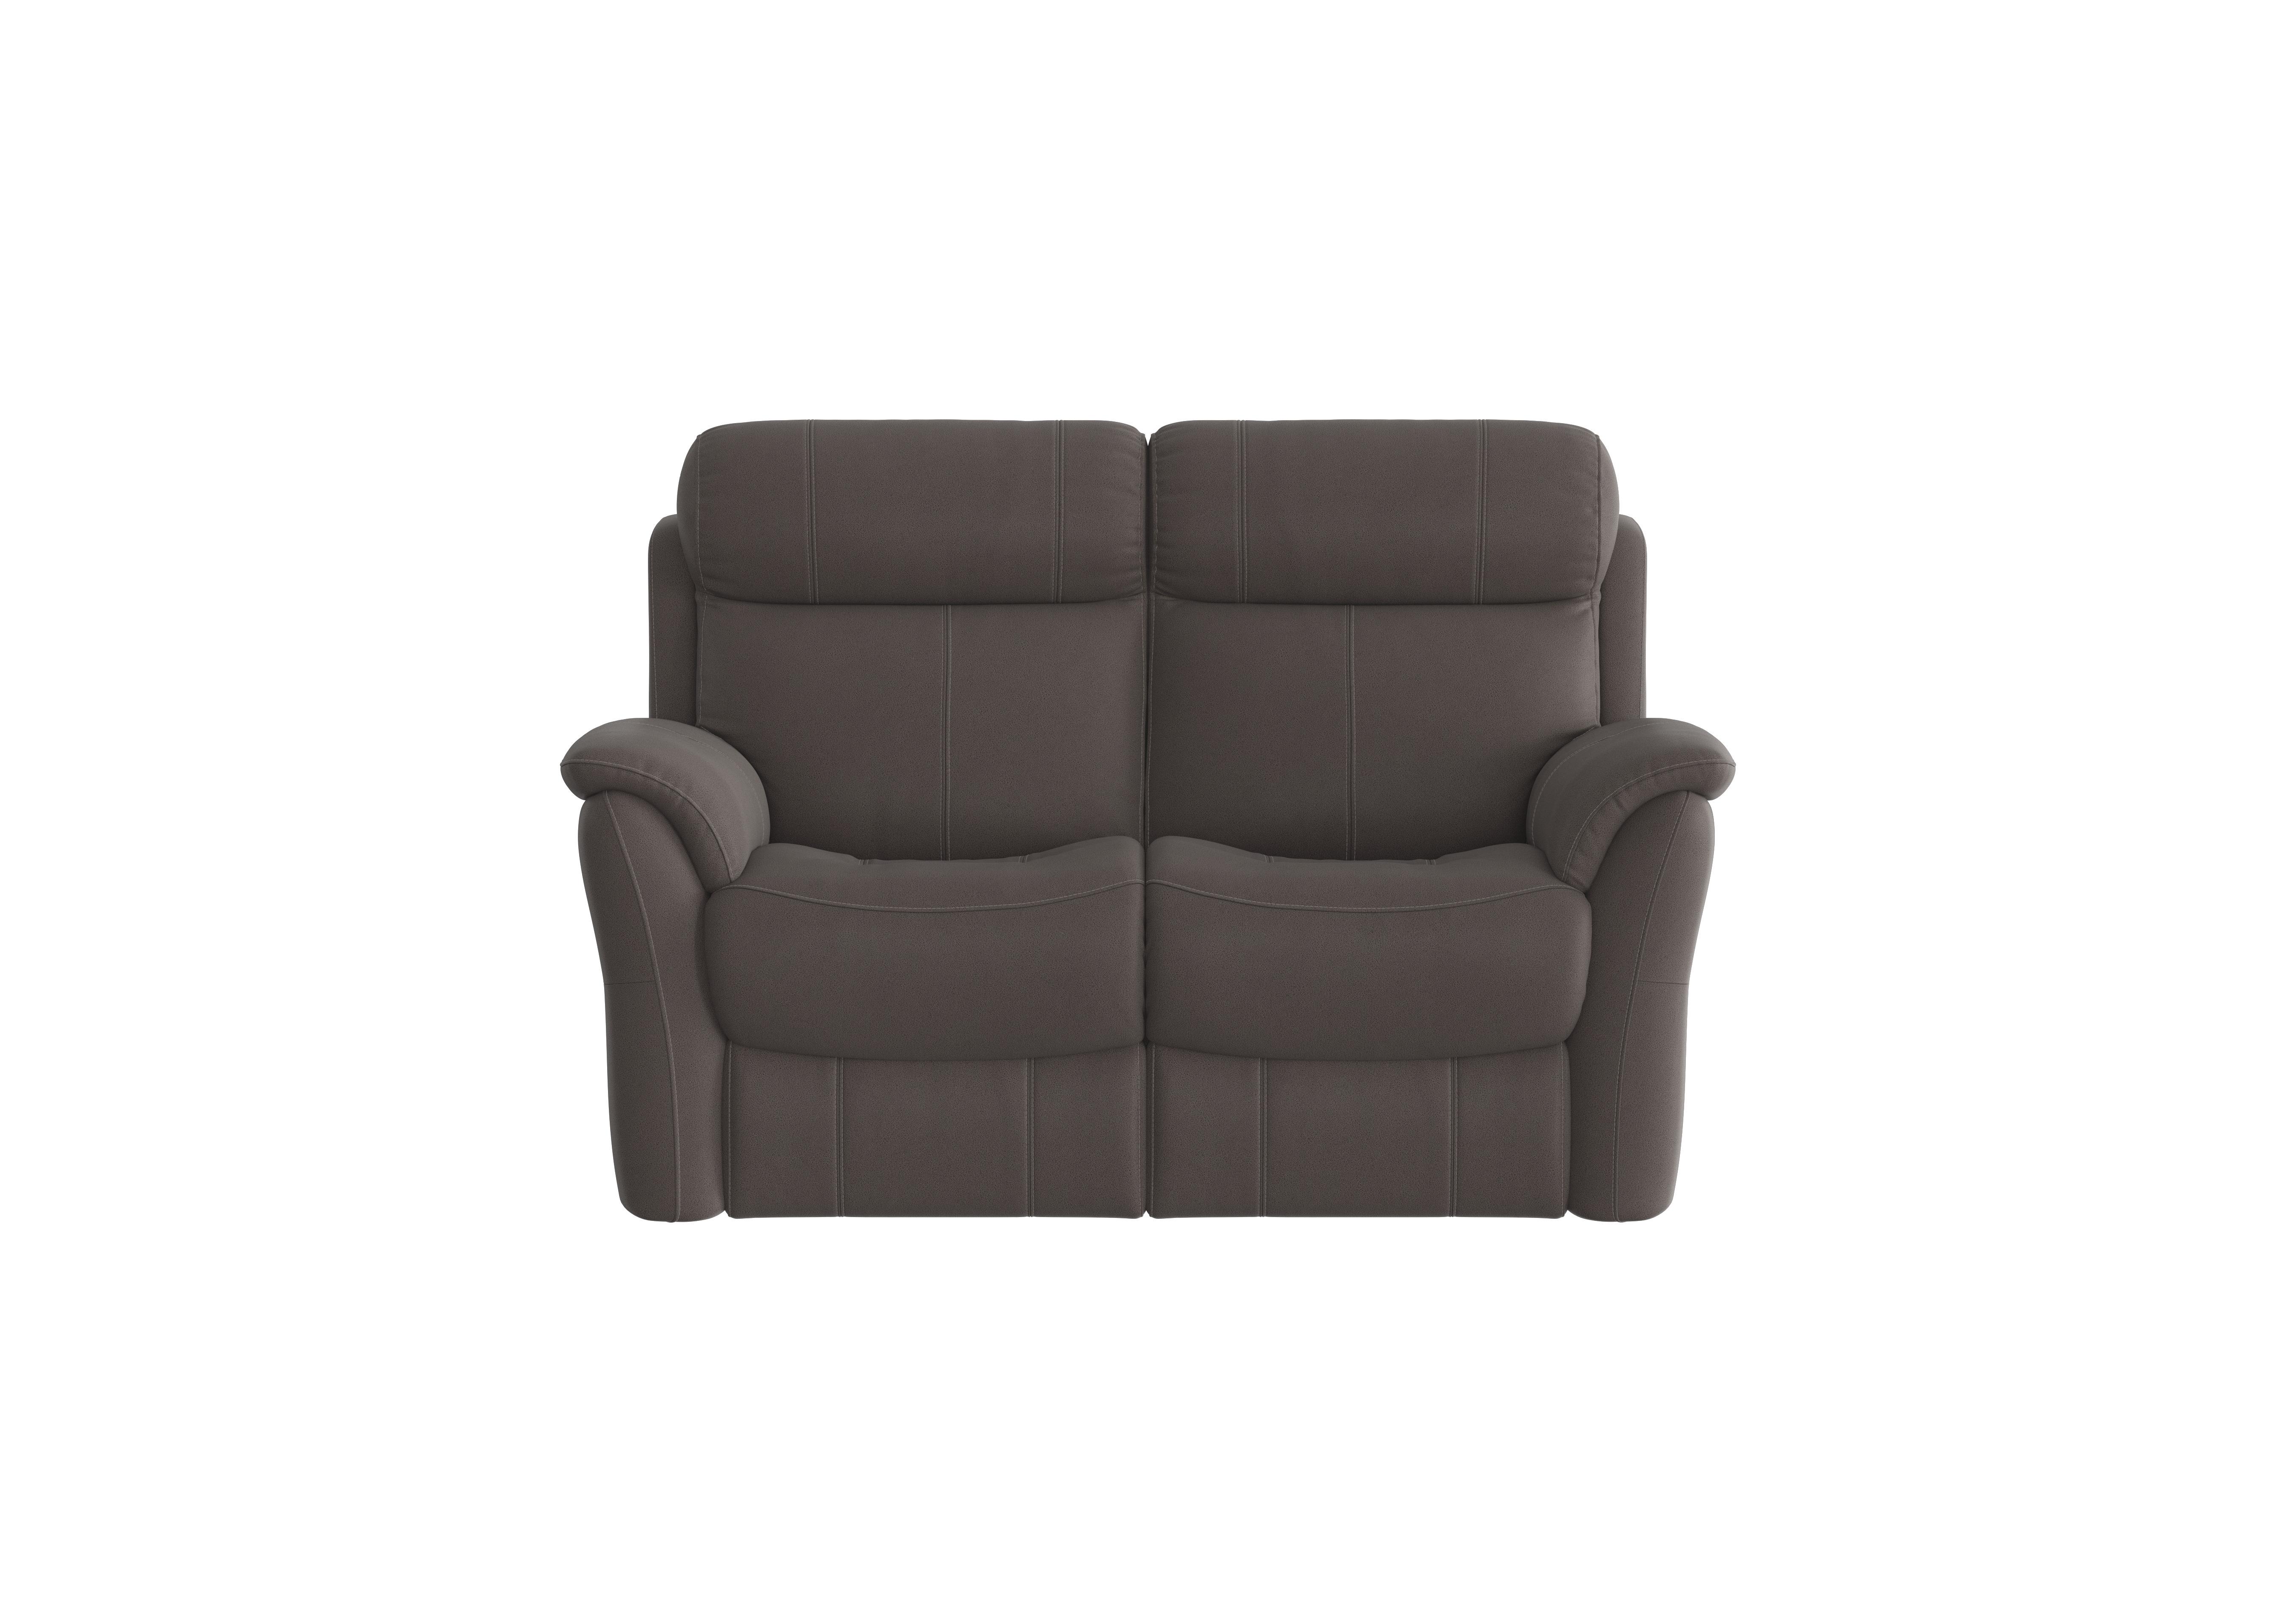 Relax Station Revive 2 Seater Fabric Sofa in Bfa-Blj-R16 Grey on Furniture Village